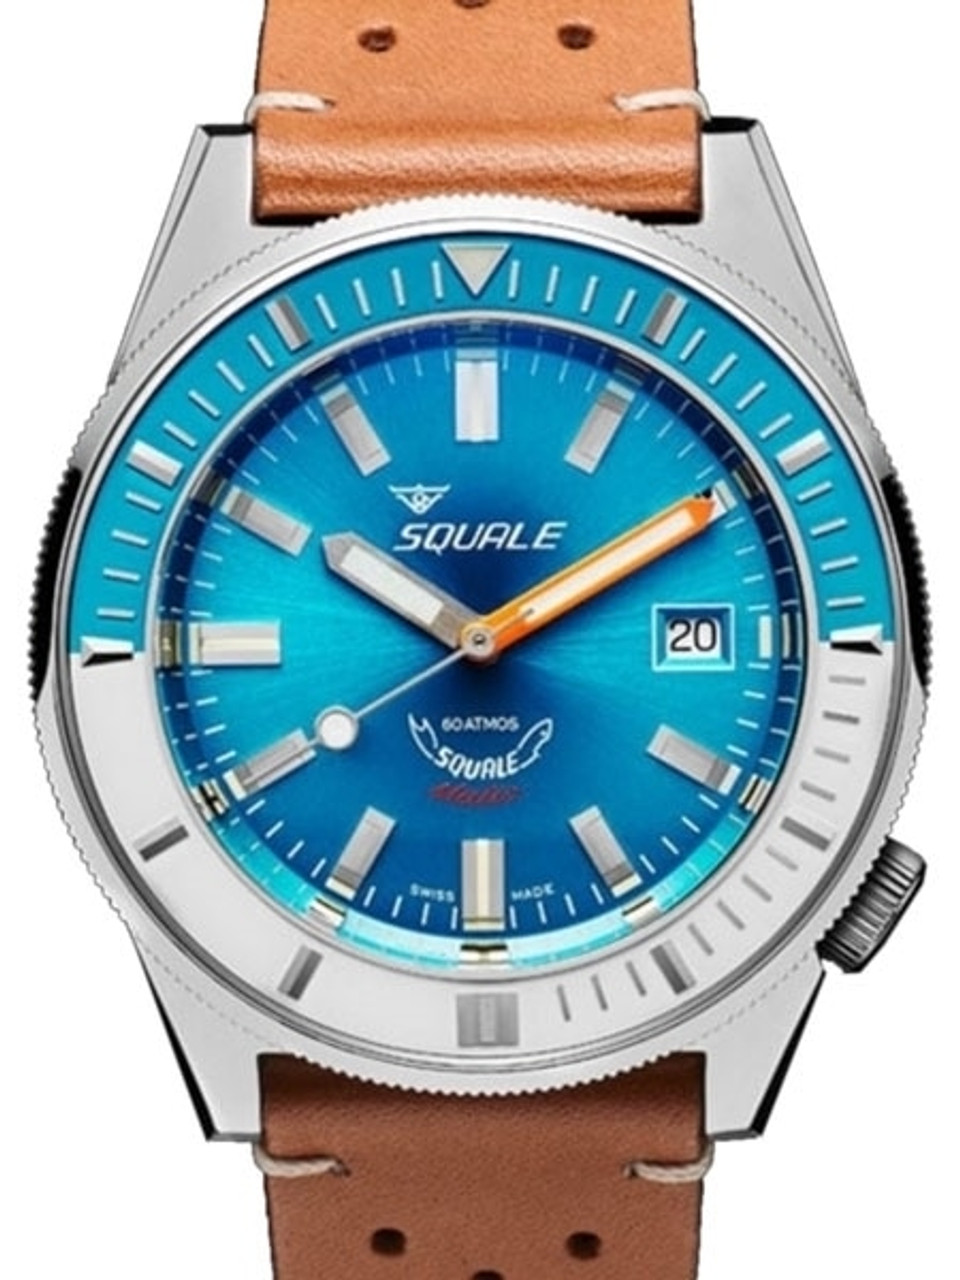 Squale Matic 600 meter Professional Swiss Automatic Dive watch with 44mm  Polished Case #Matic-Blue-Pol